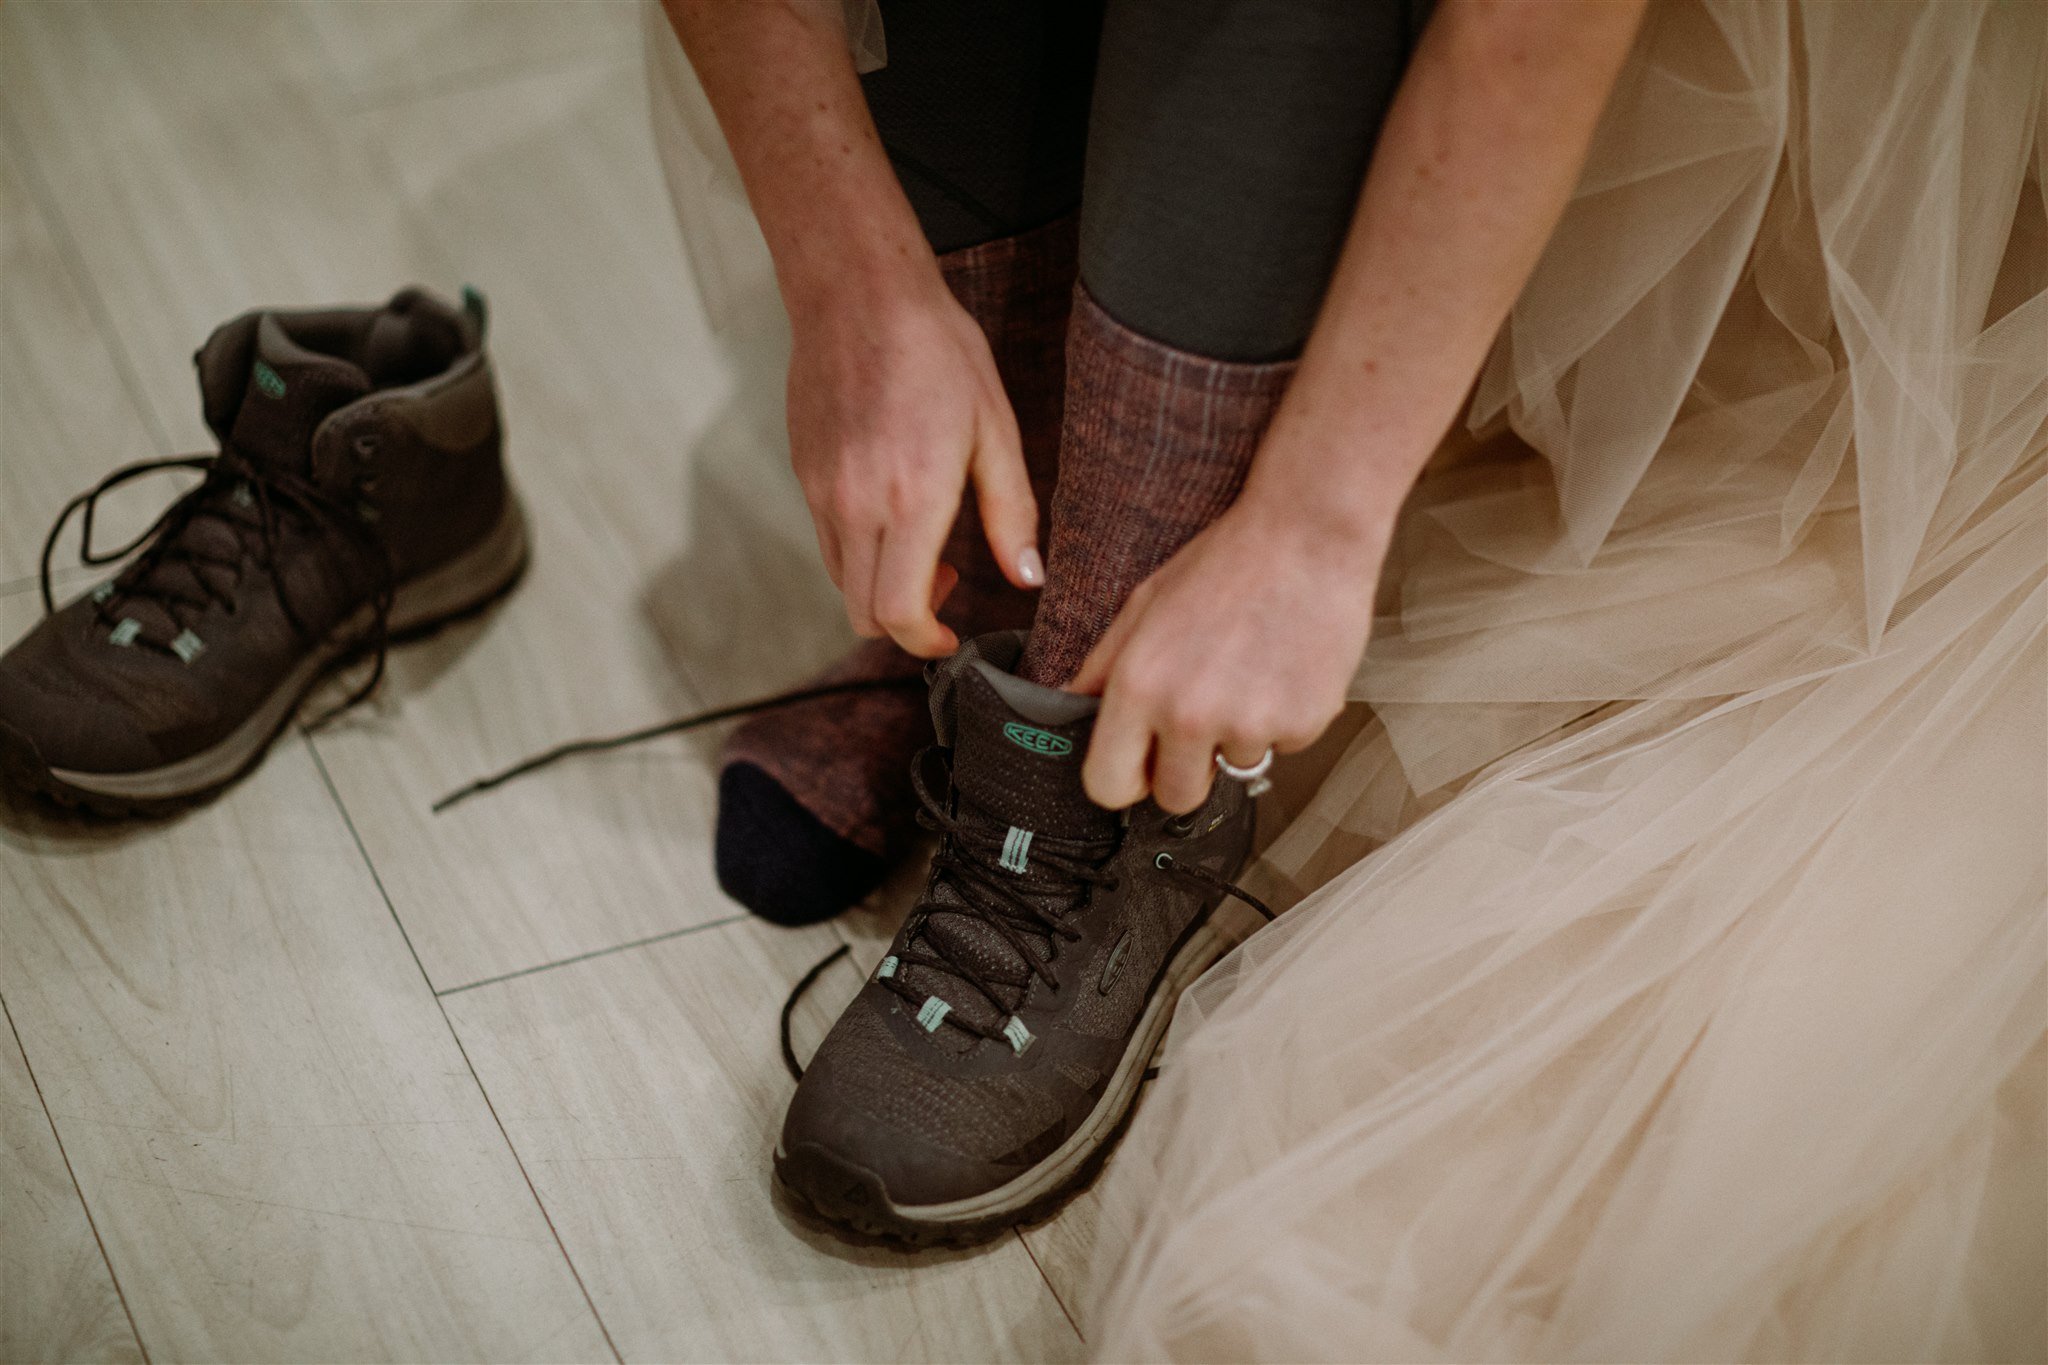 Iceland Elopement getting ready photo of bride and hiking boots by Iceland elopement photographer &amp; planner